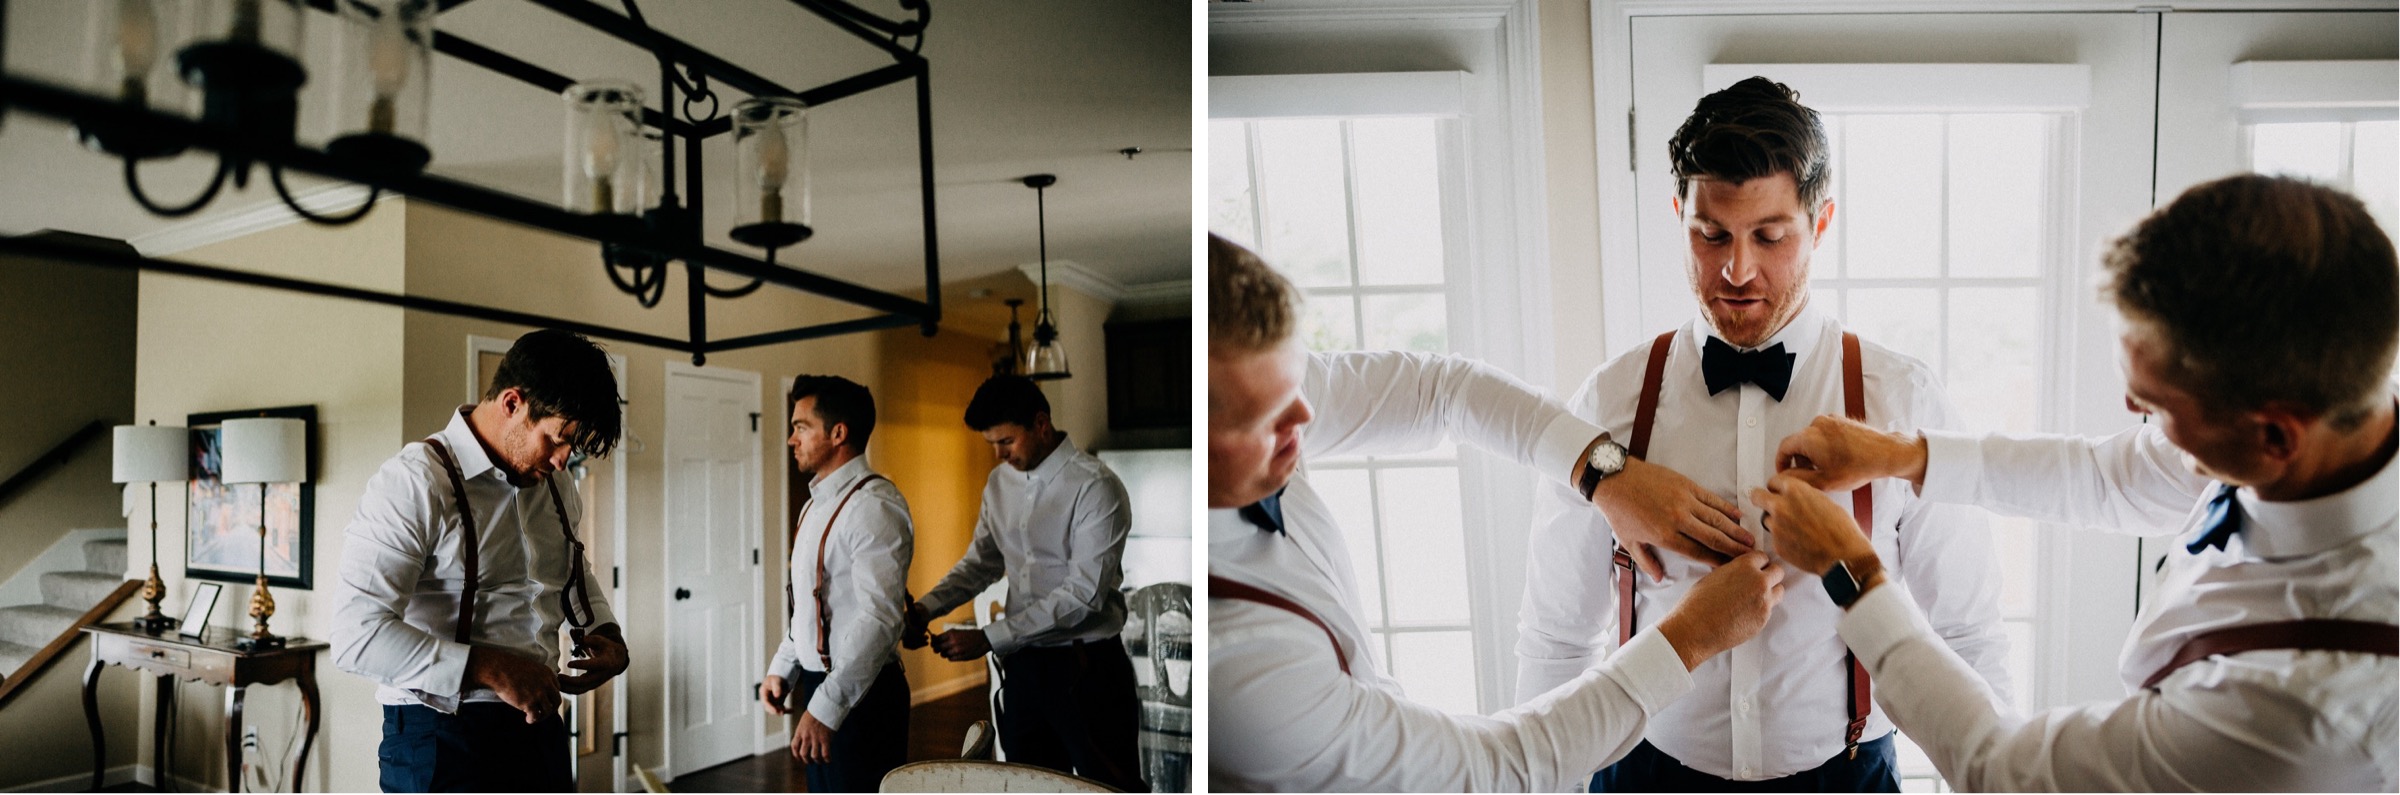 groom and groomsmen getting ready during the getting ready portion of the wedding day timeline